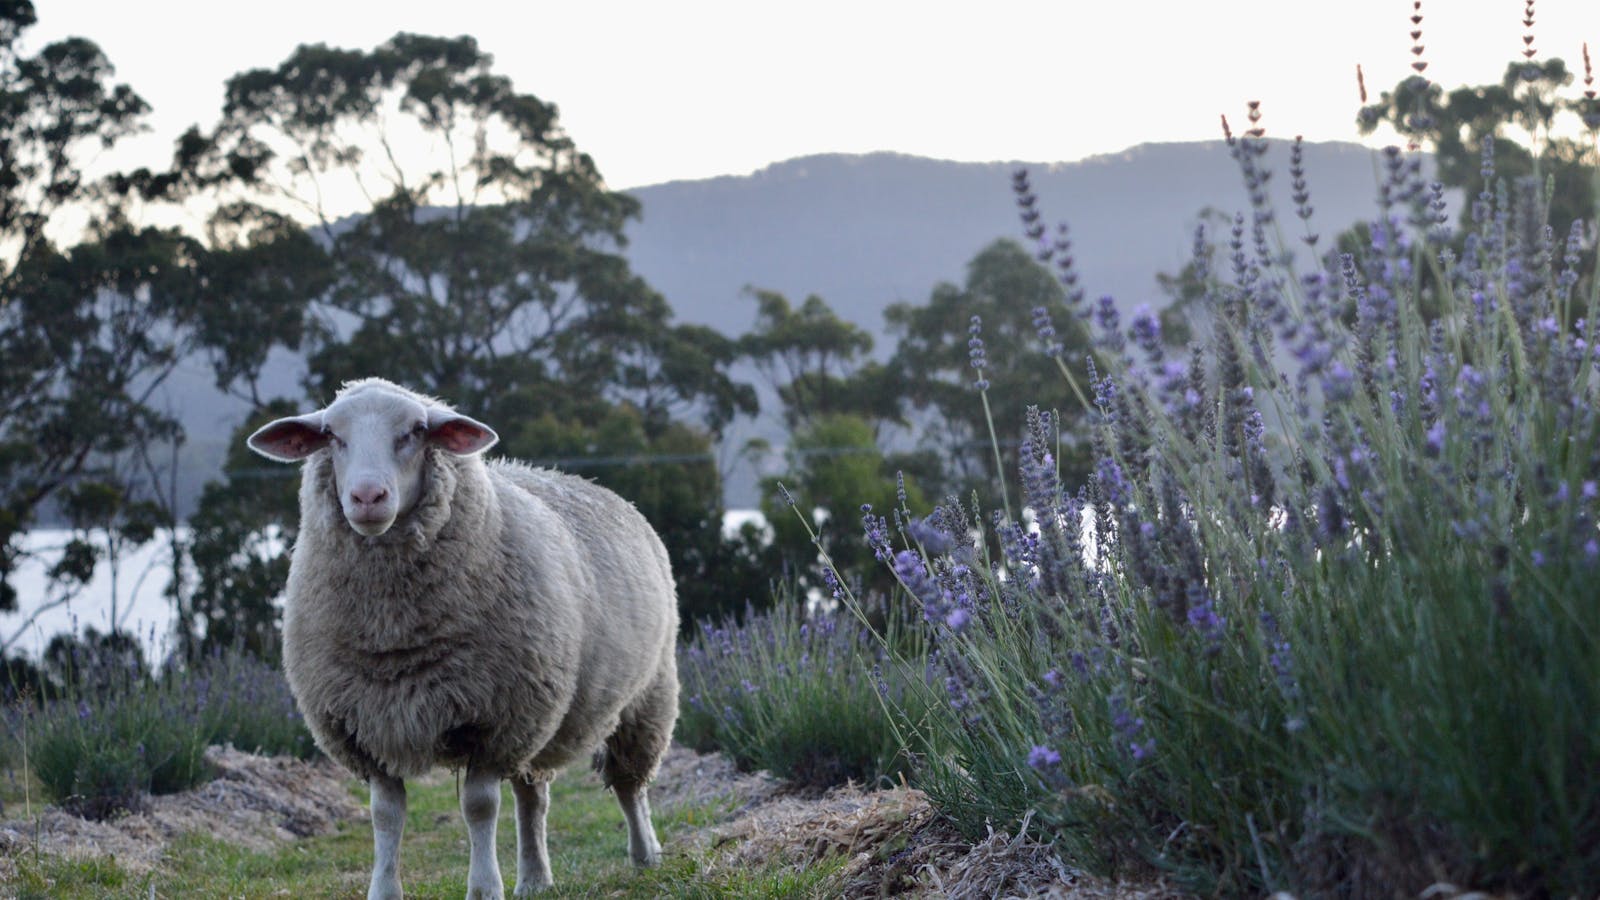 Sheep at dusk in the lavender field